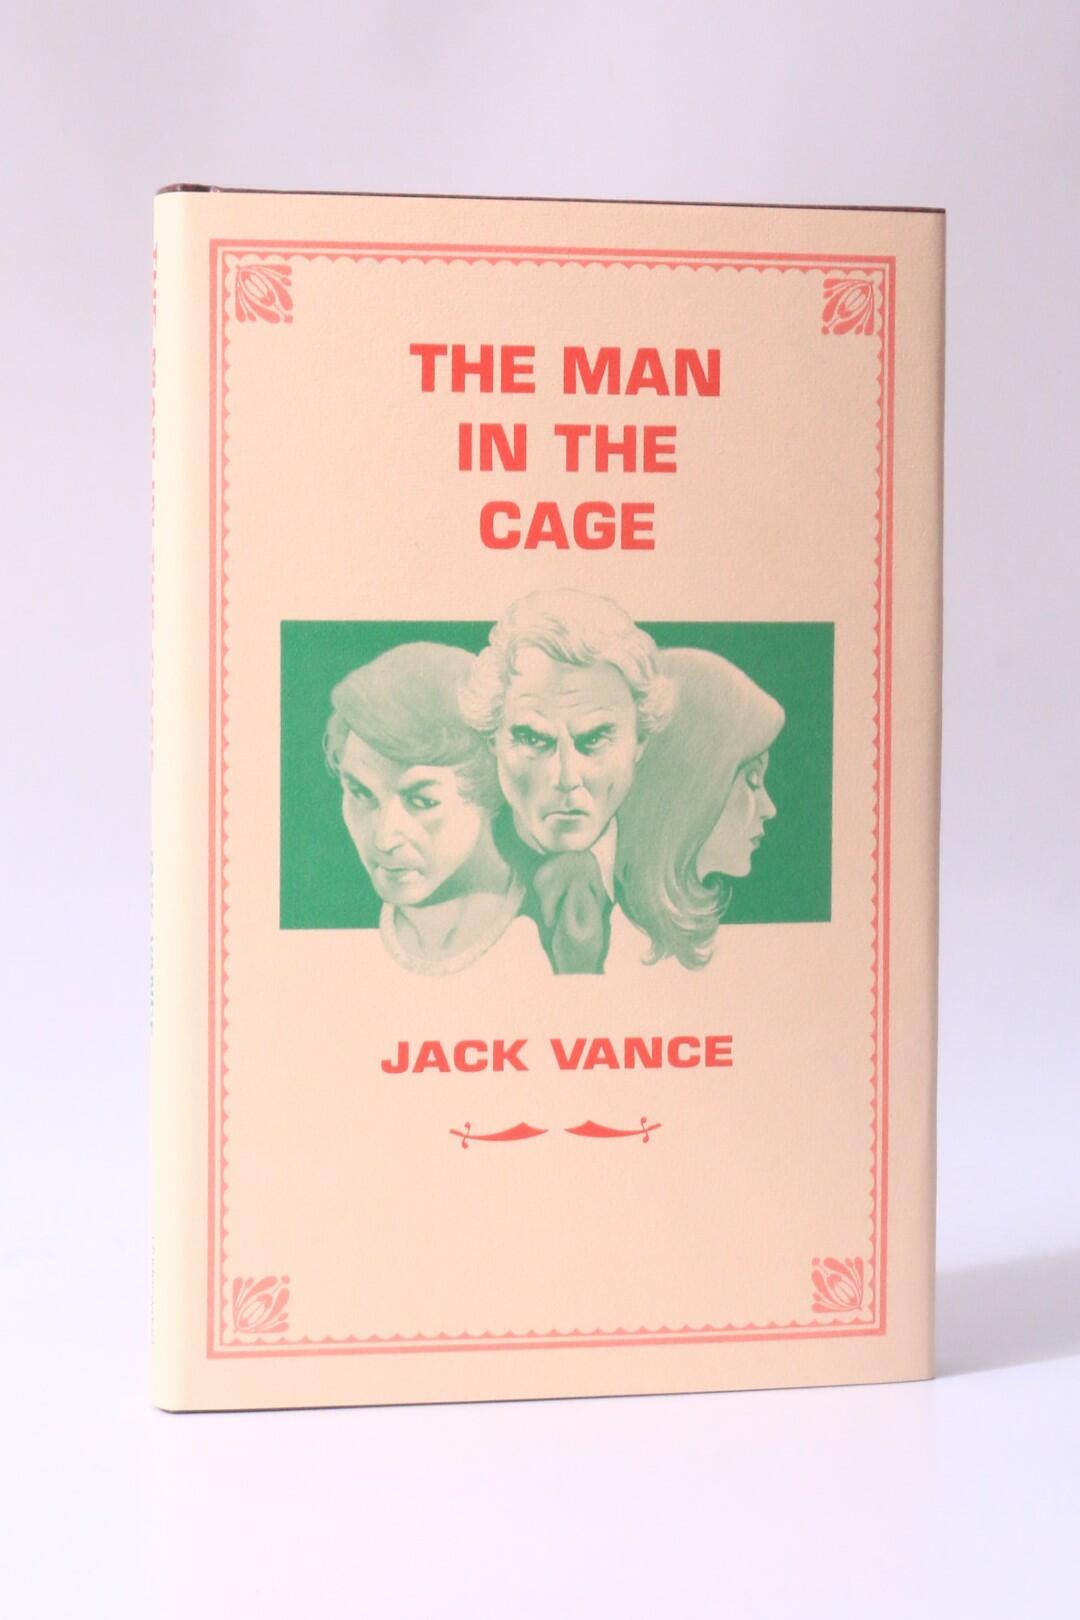 Jack Vance - The Man in the Cage - Underwood-Miller, 1983, Signed Limited Edition.